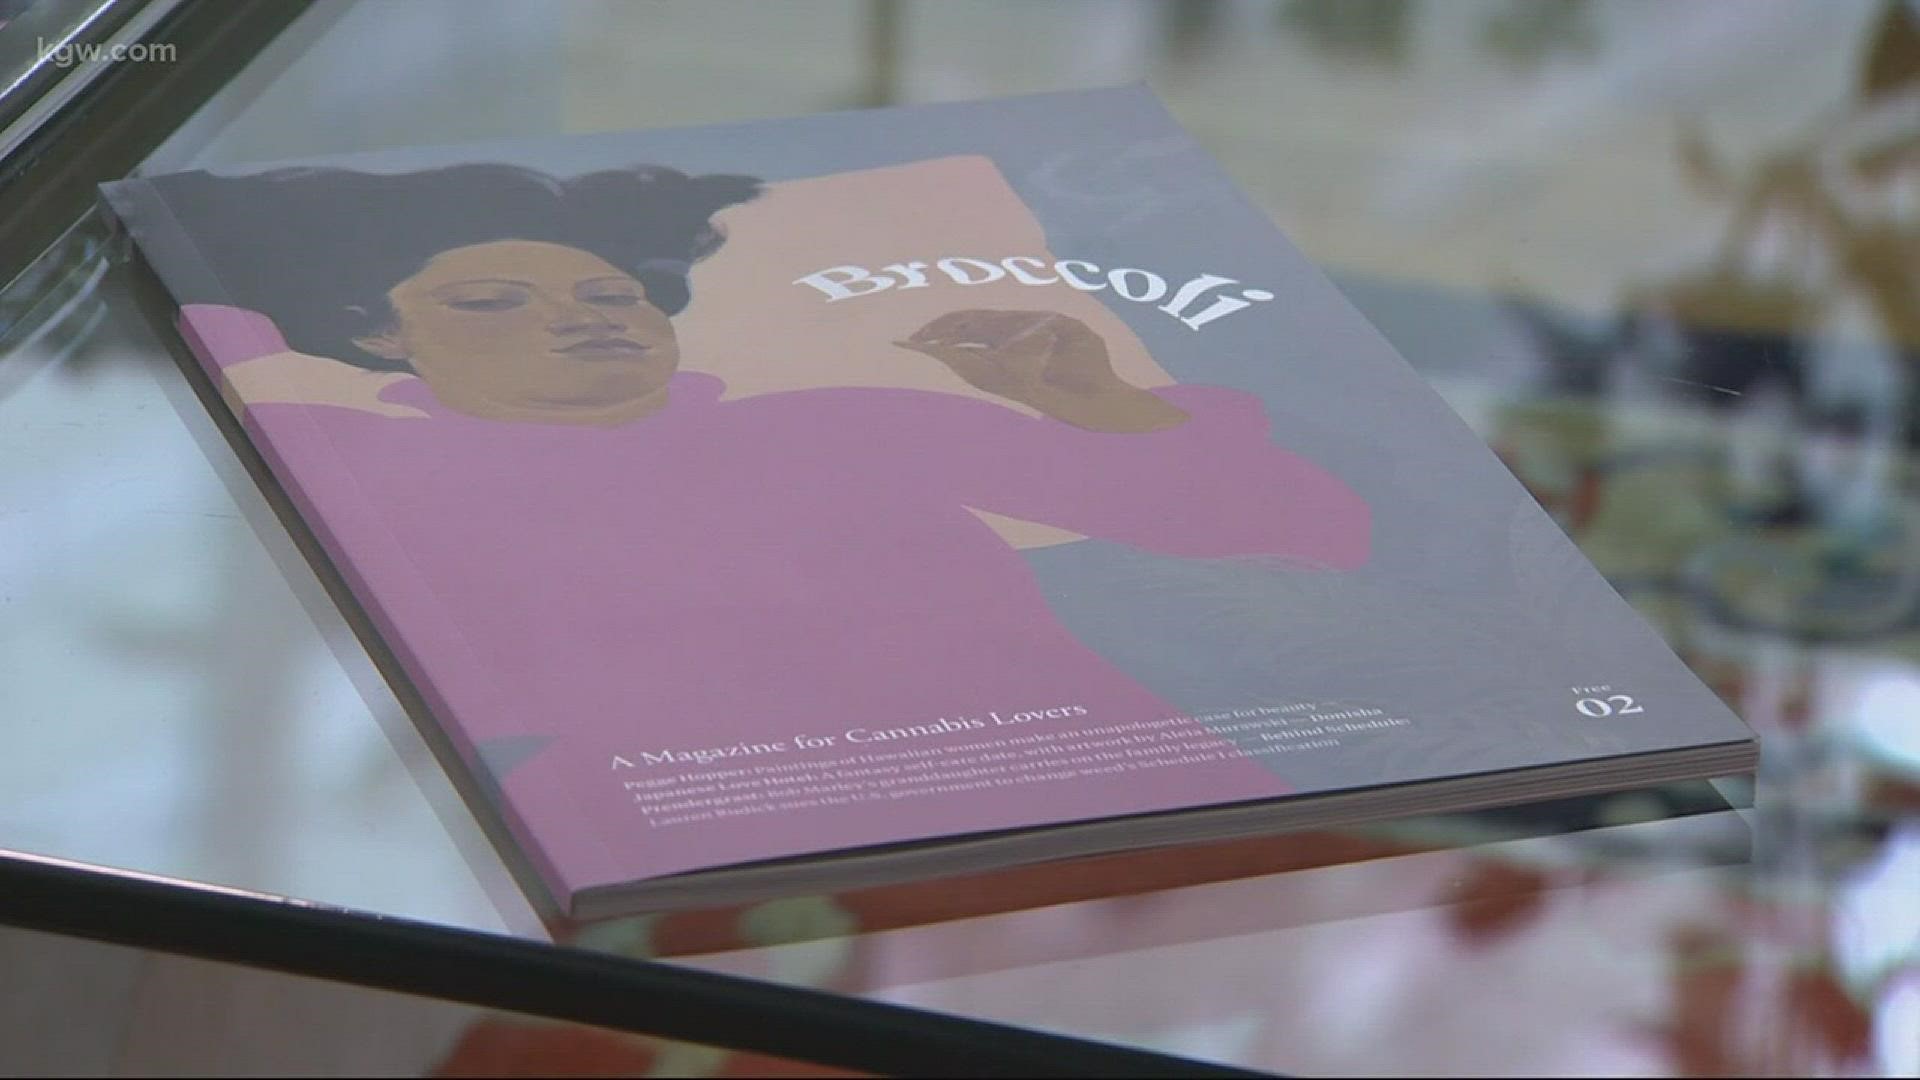 A new magazine about pot is aimed at women.